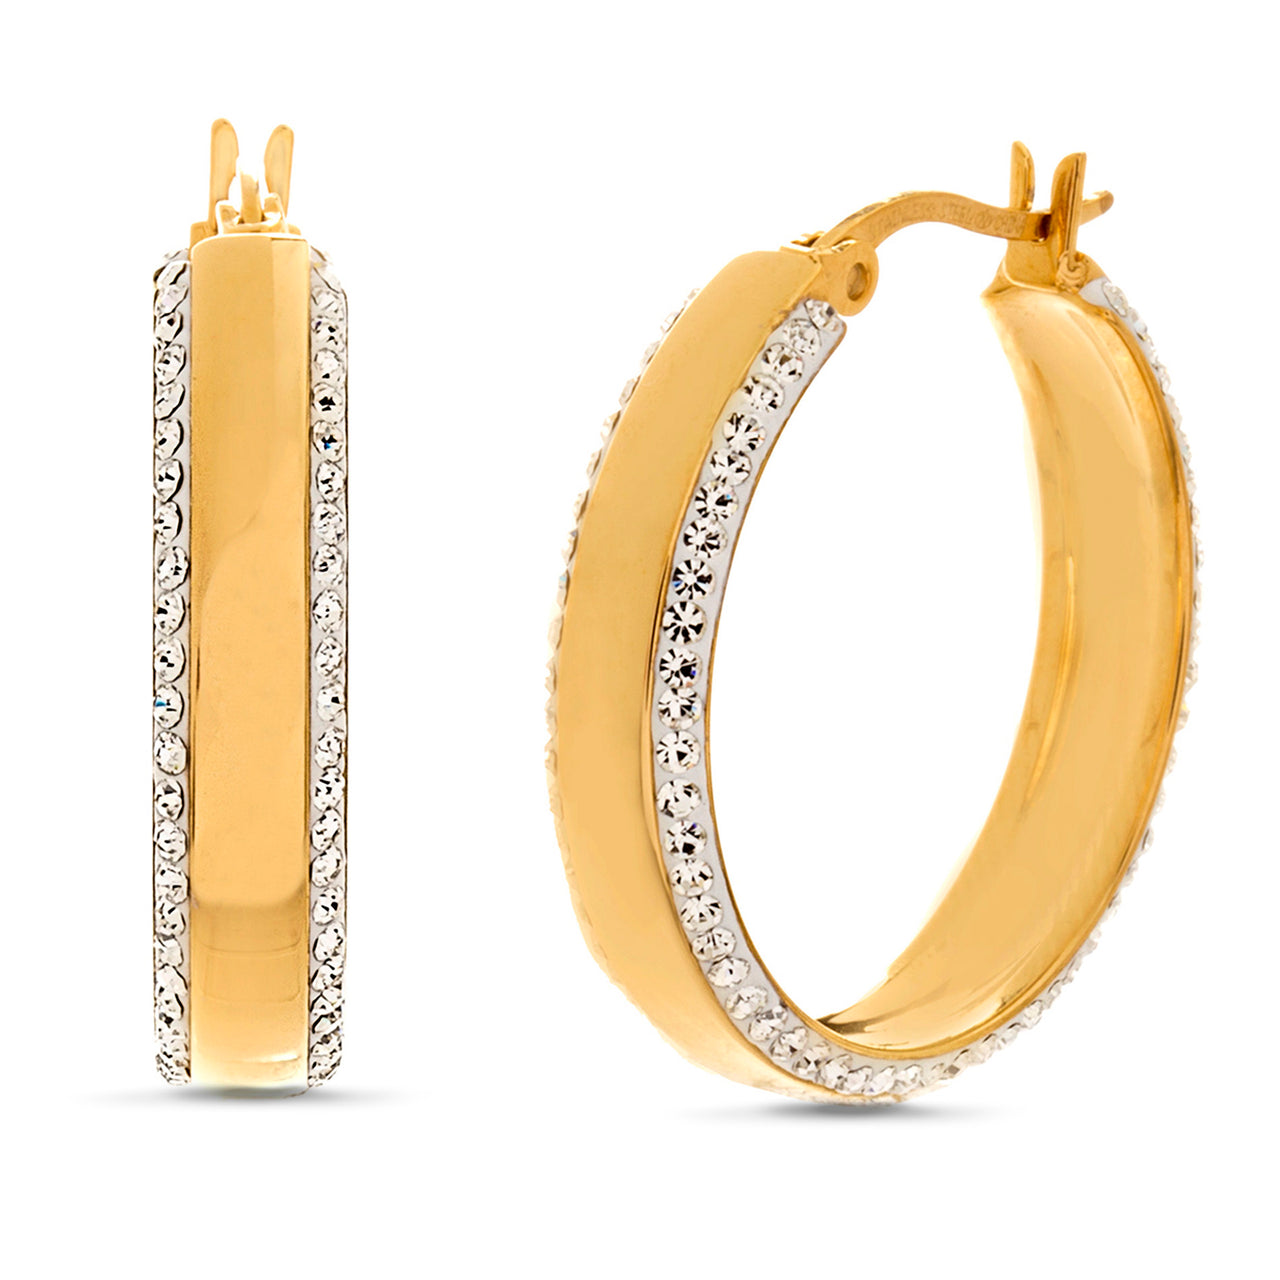 Lesa Michele Polished Crystal Border Hoop Earrings in Yellow Gold IP Stainless Steel